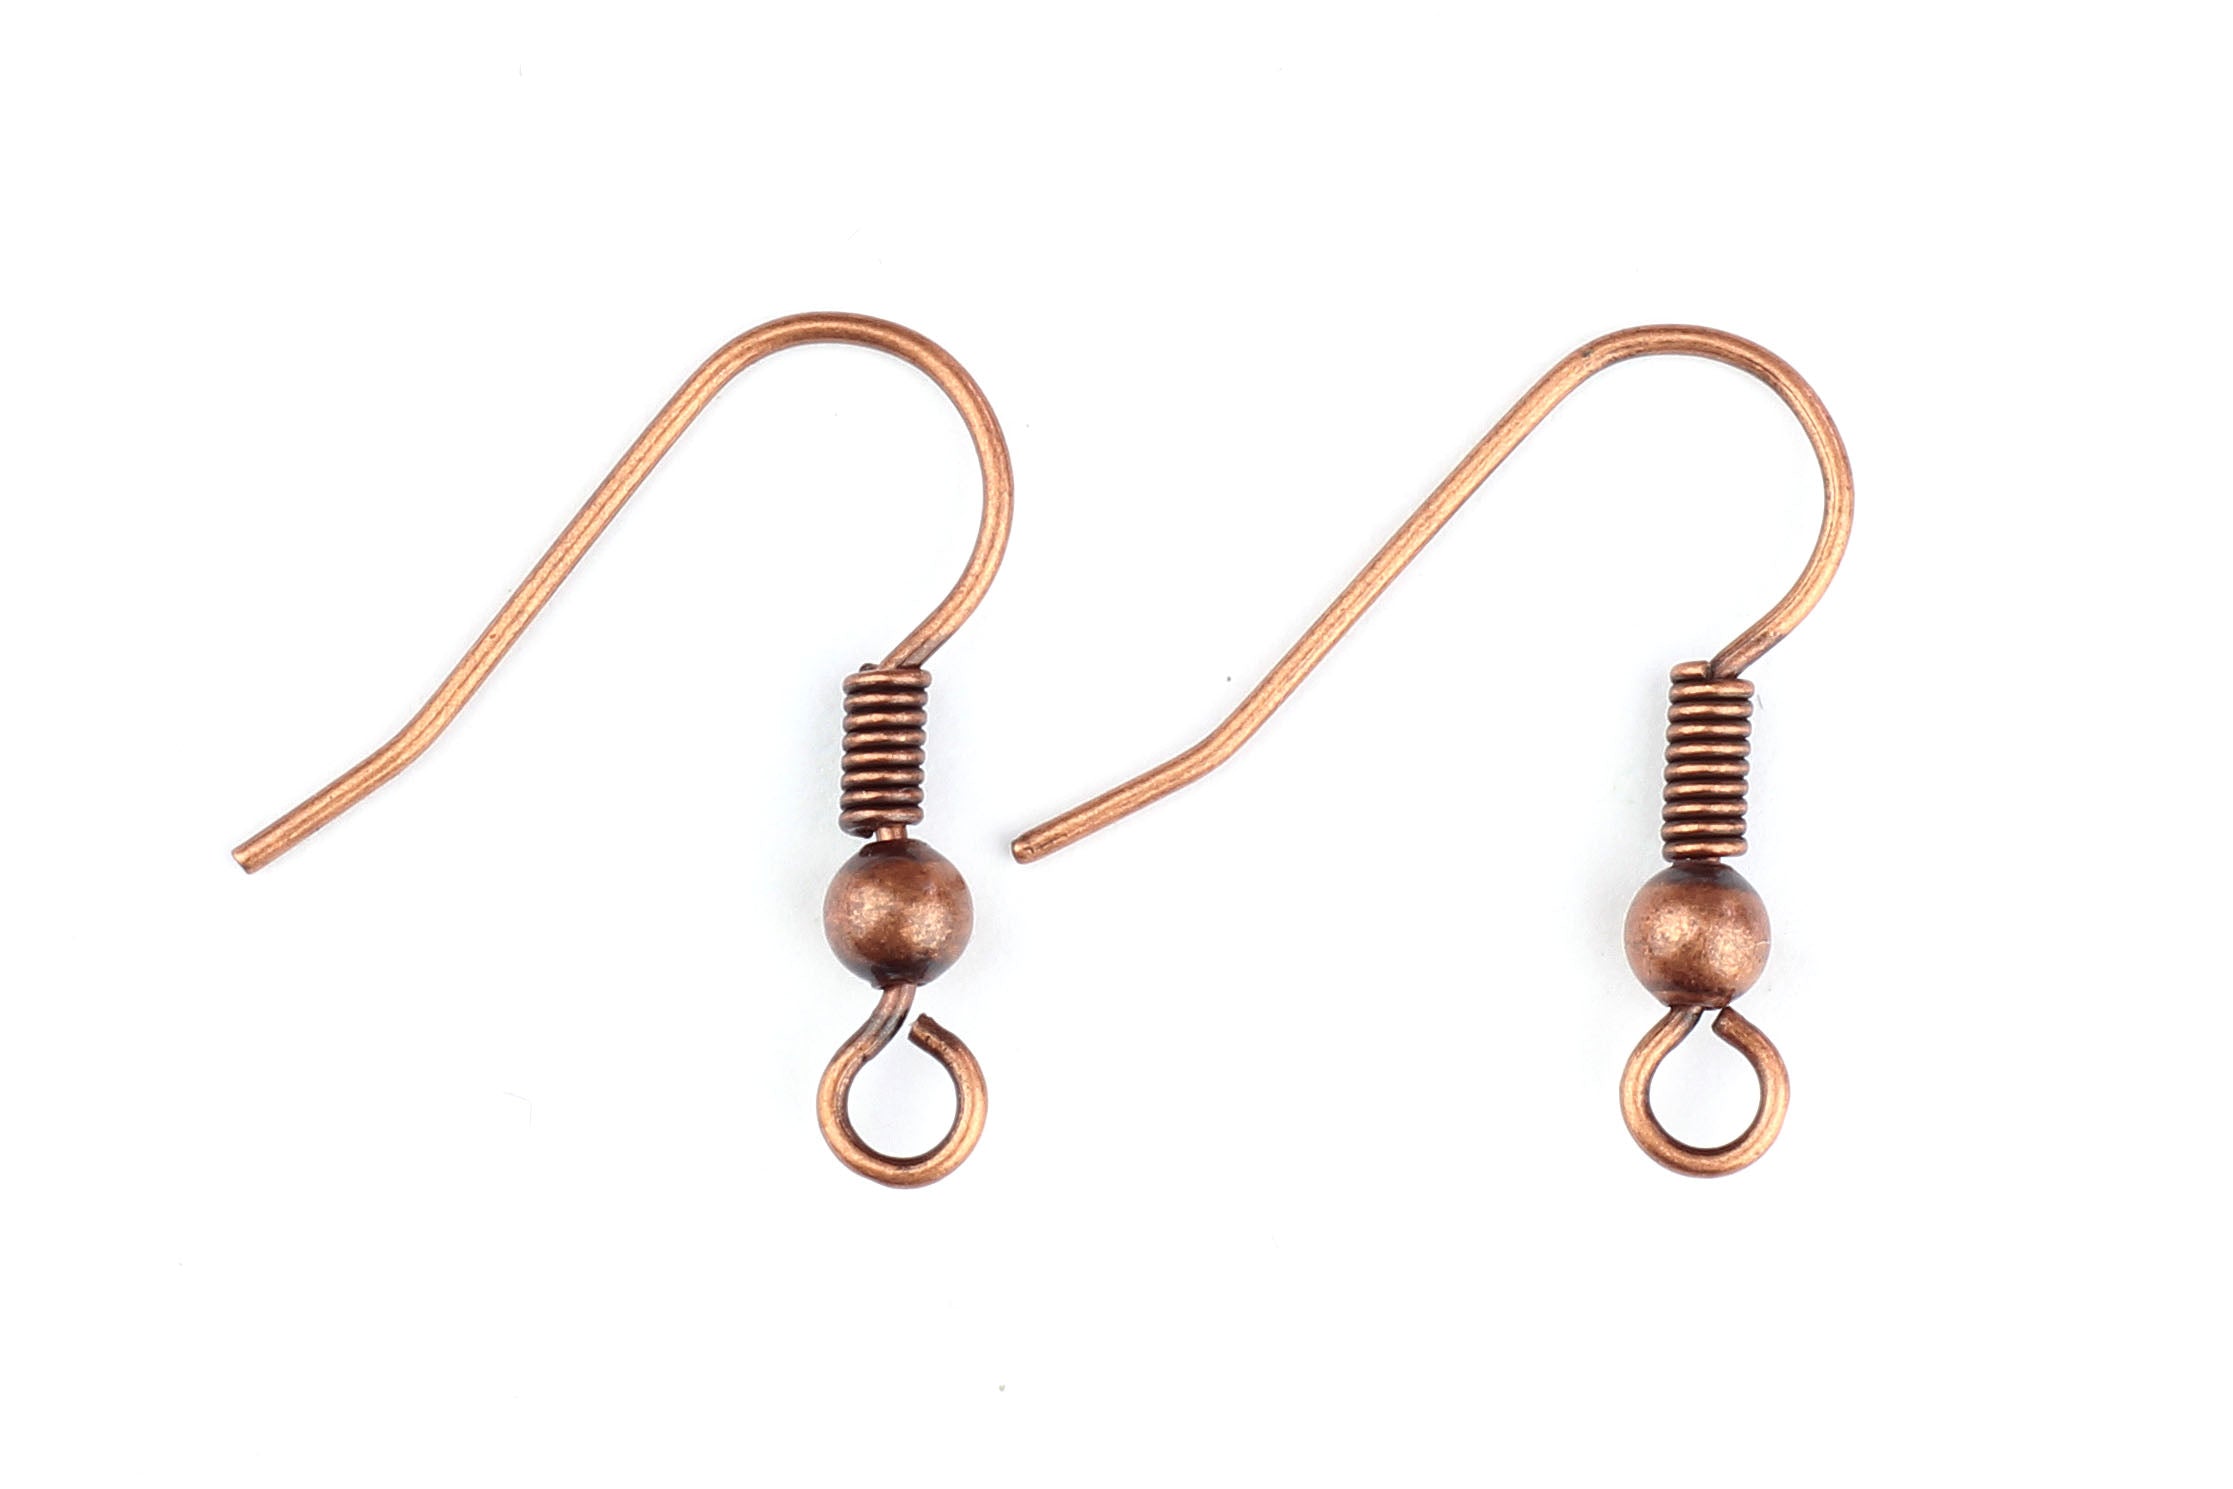 Copper Plated Fish Hook Ear Wires - 5 pairs